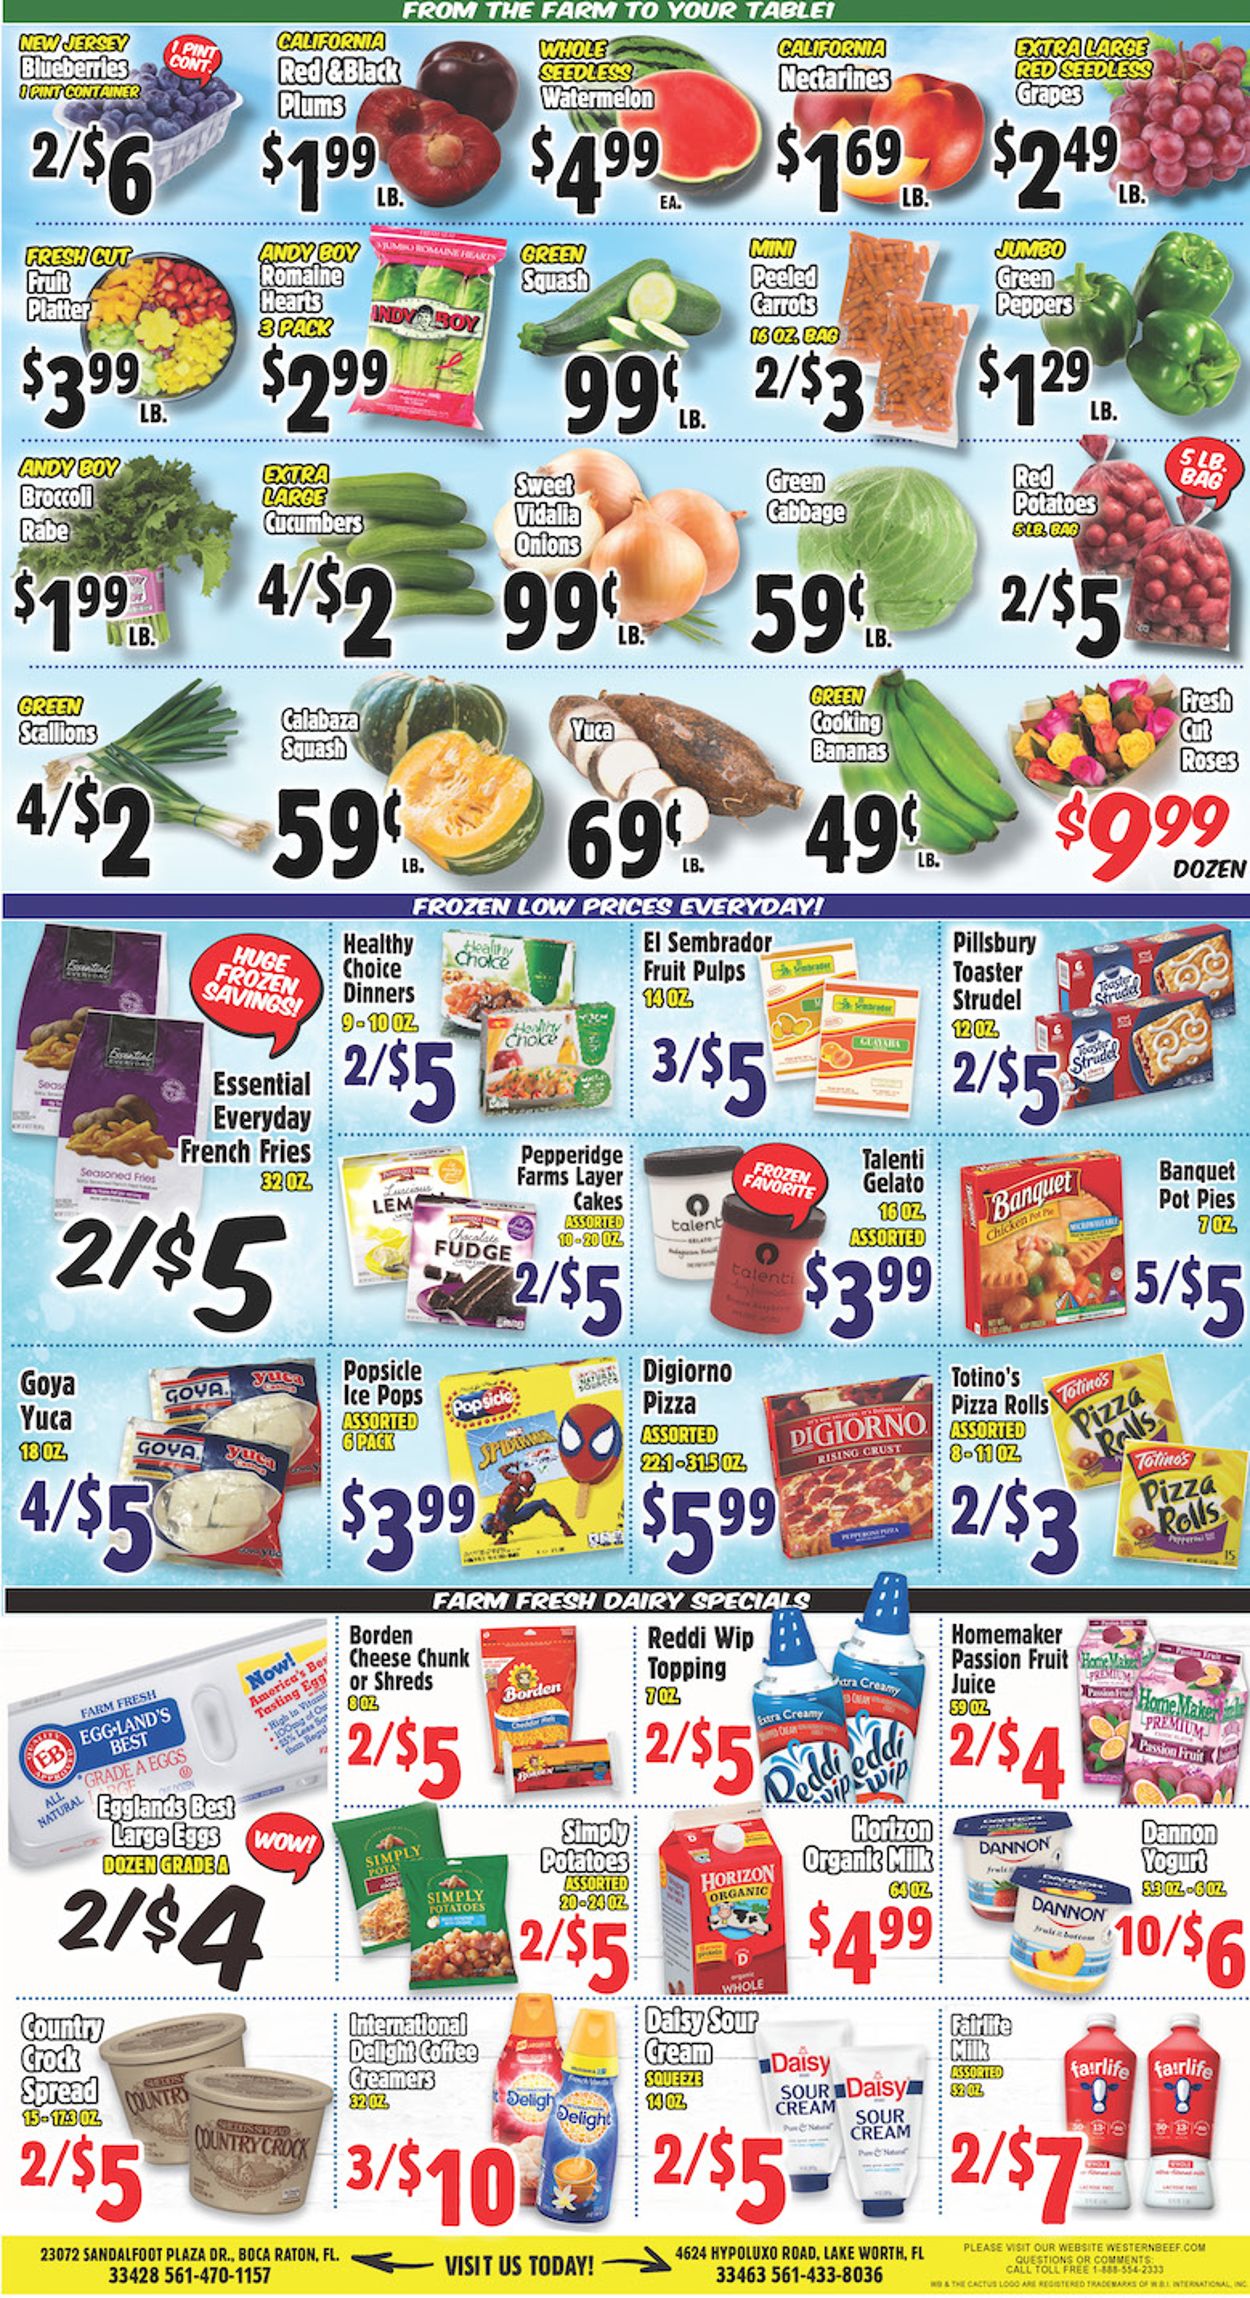 Western Beef Current weekly ad 07/14 - 07/20/2021 [2] - frequent-ads.com